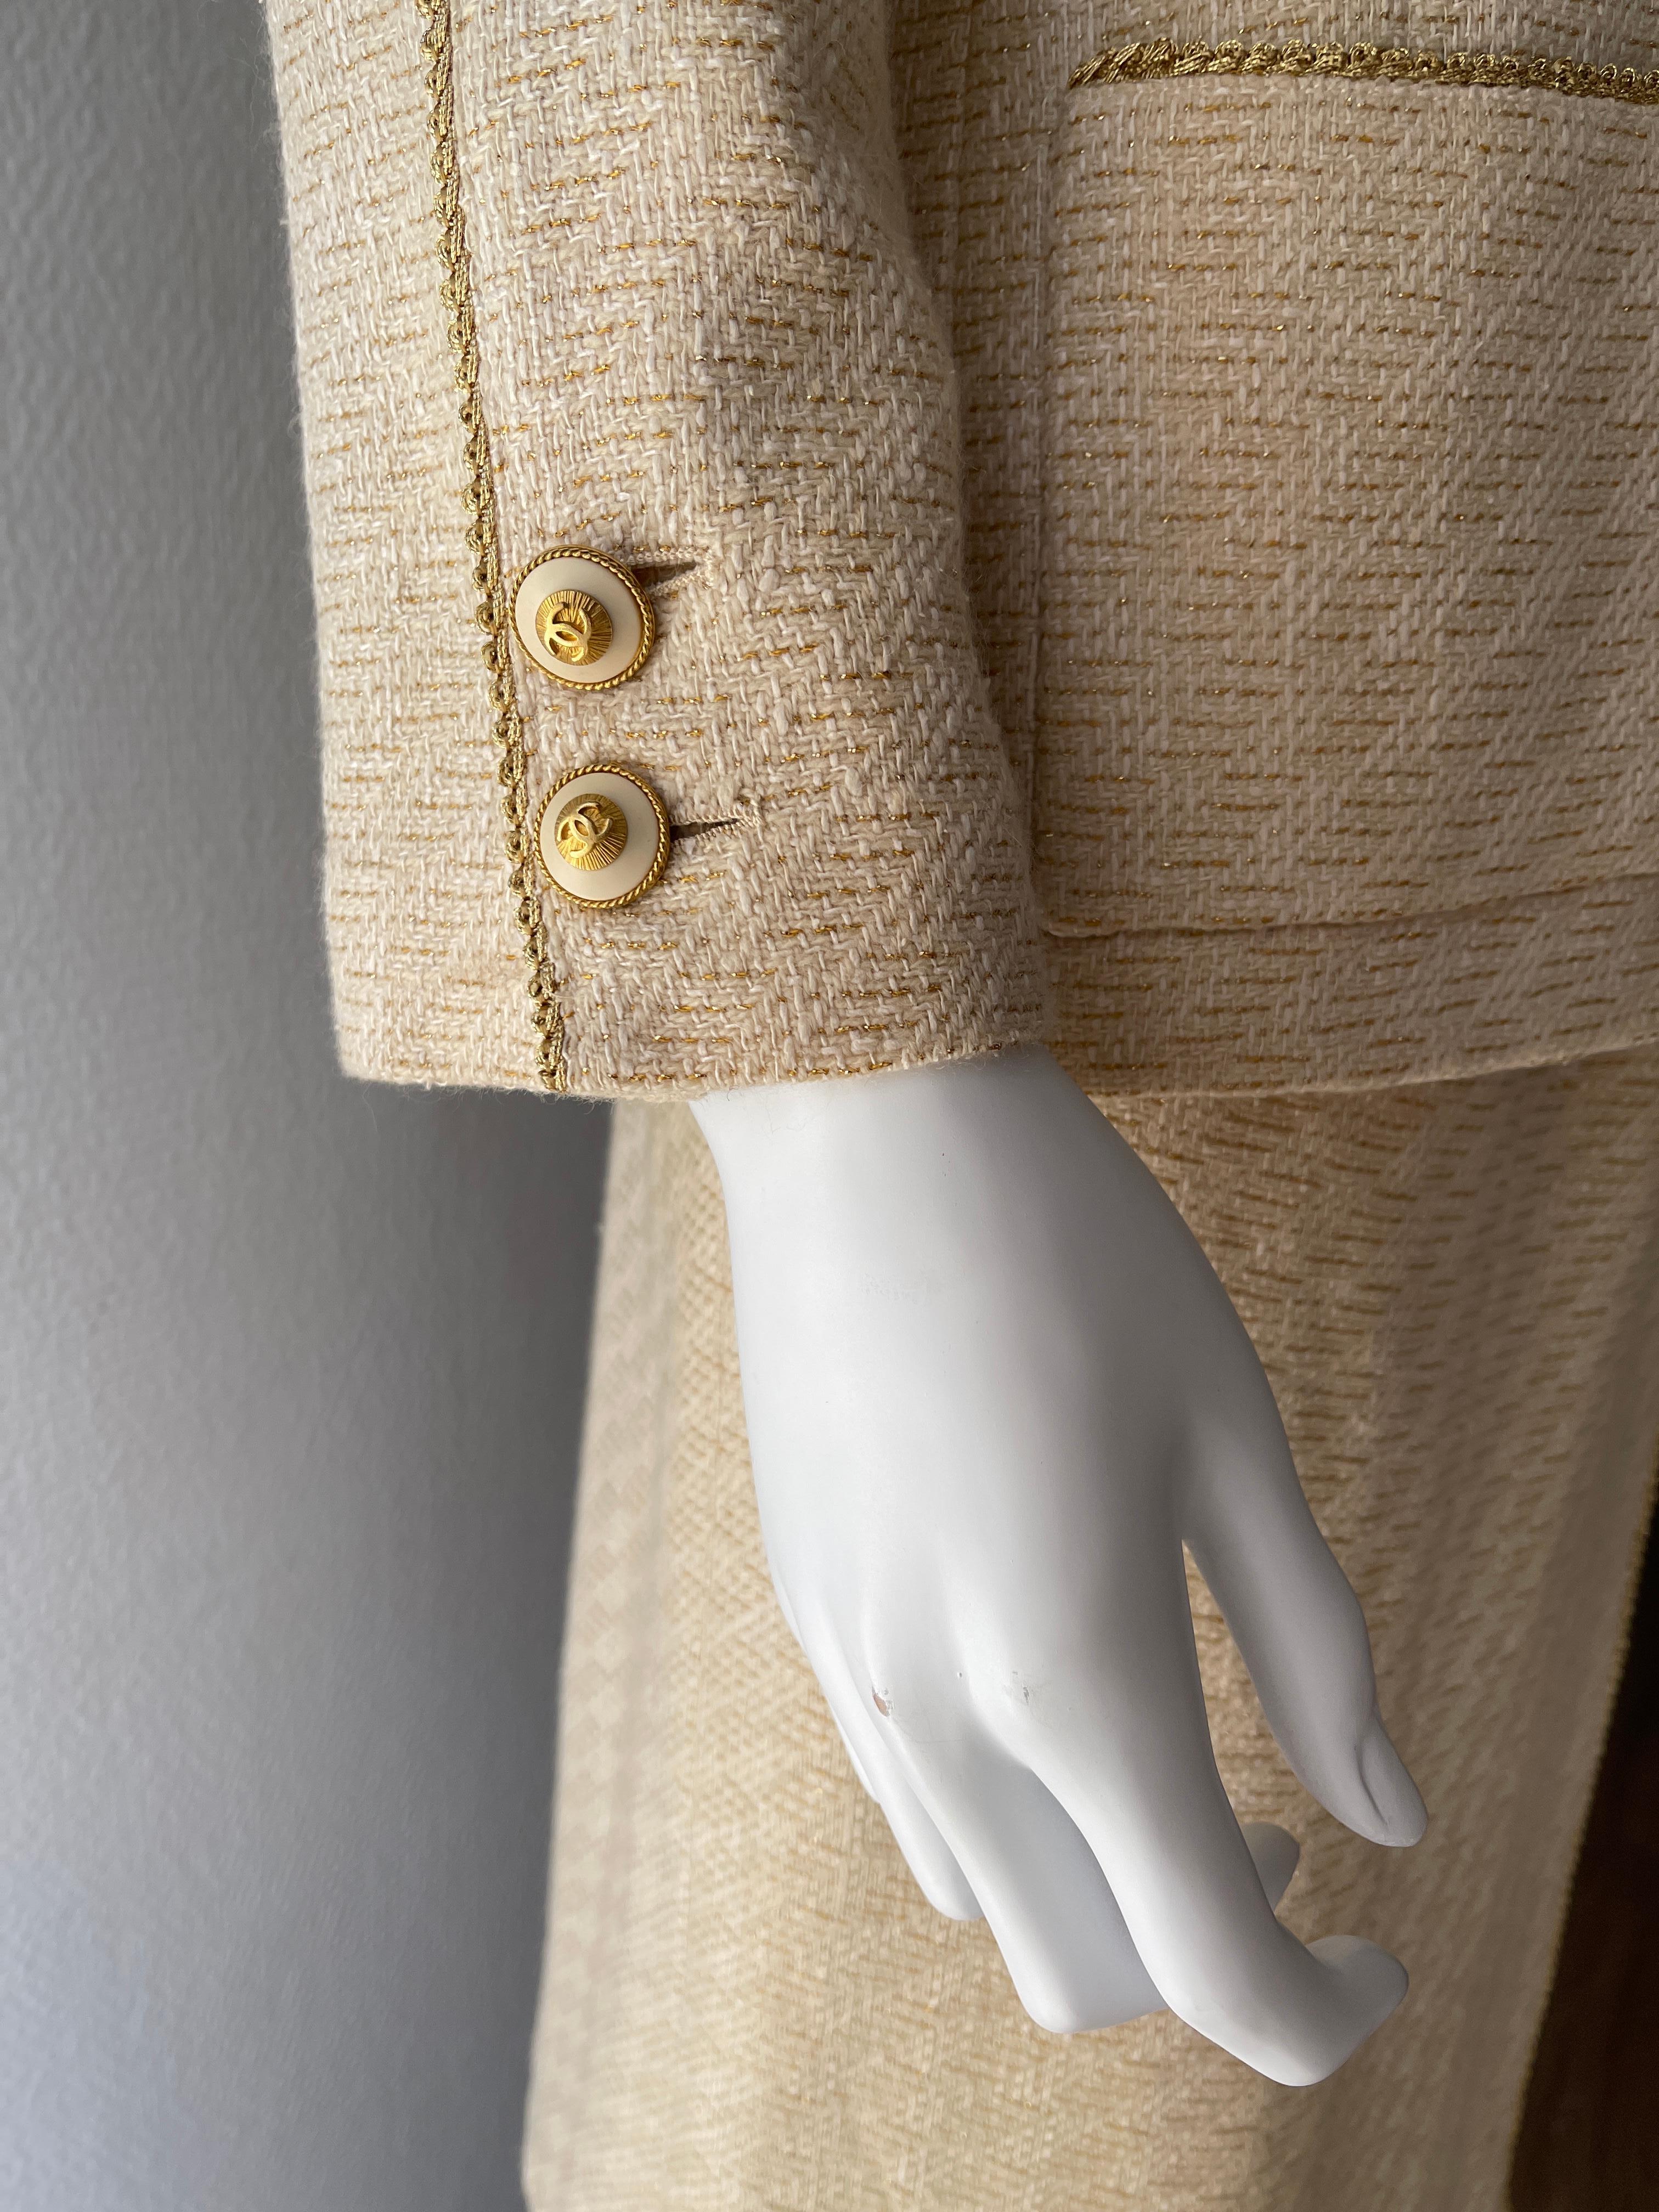 Brown Vintage Chanel Tweed Skirt Suit 2pieces Set Ivory and Gold 